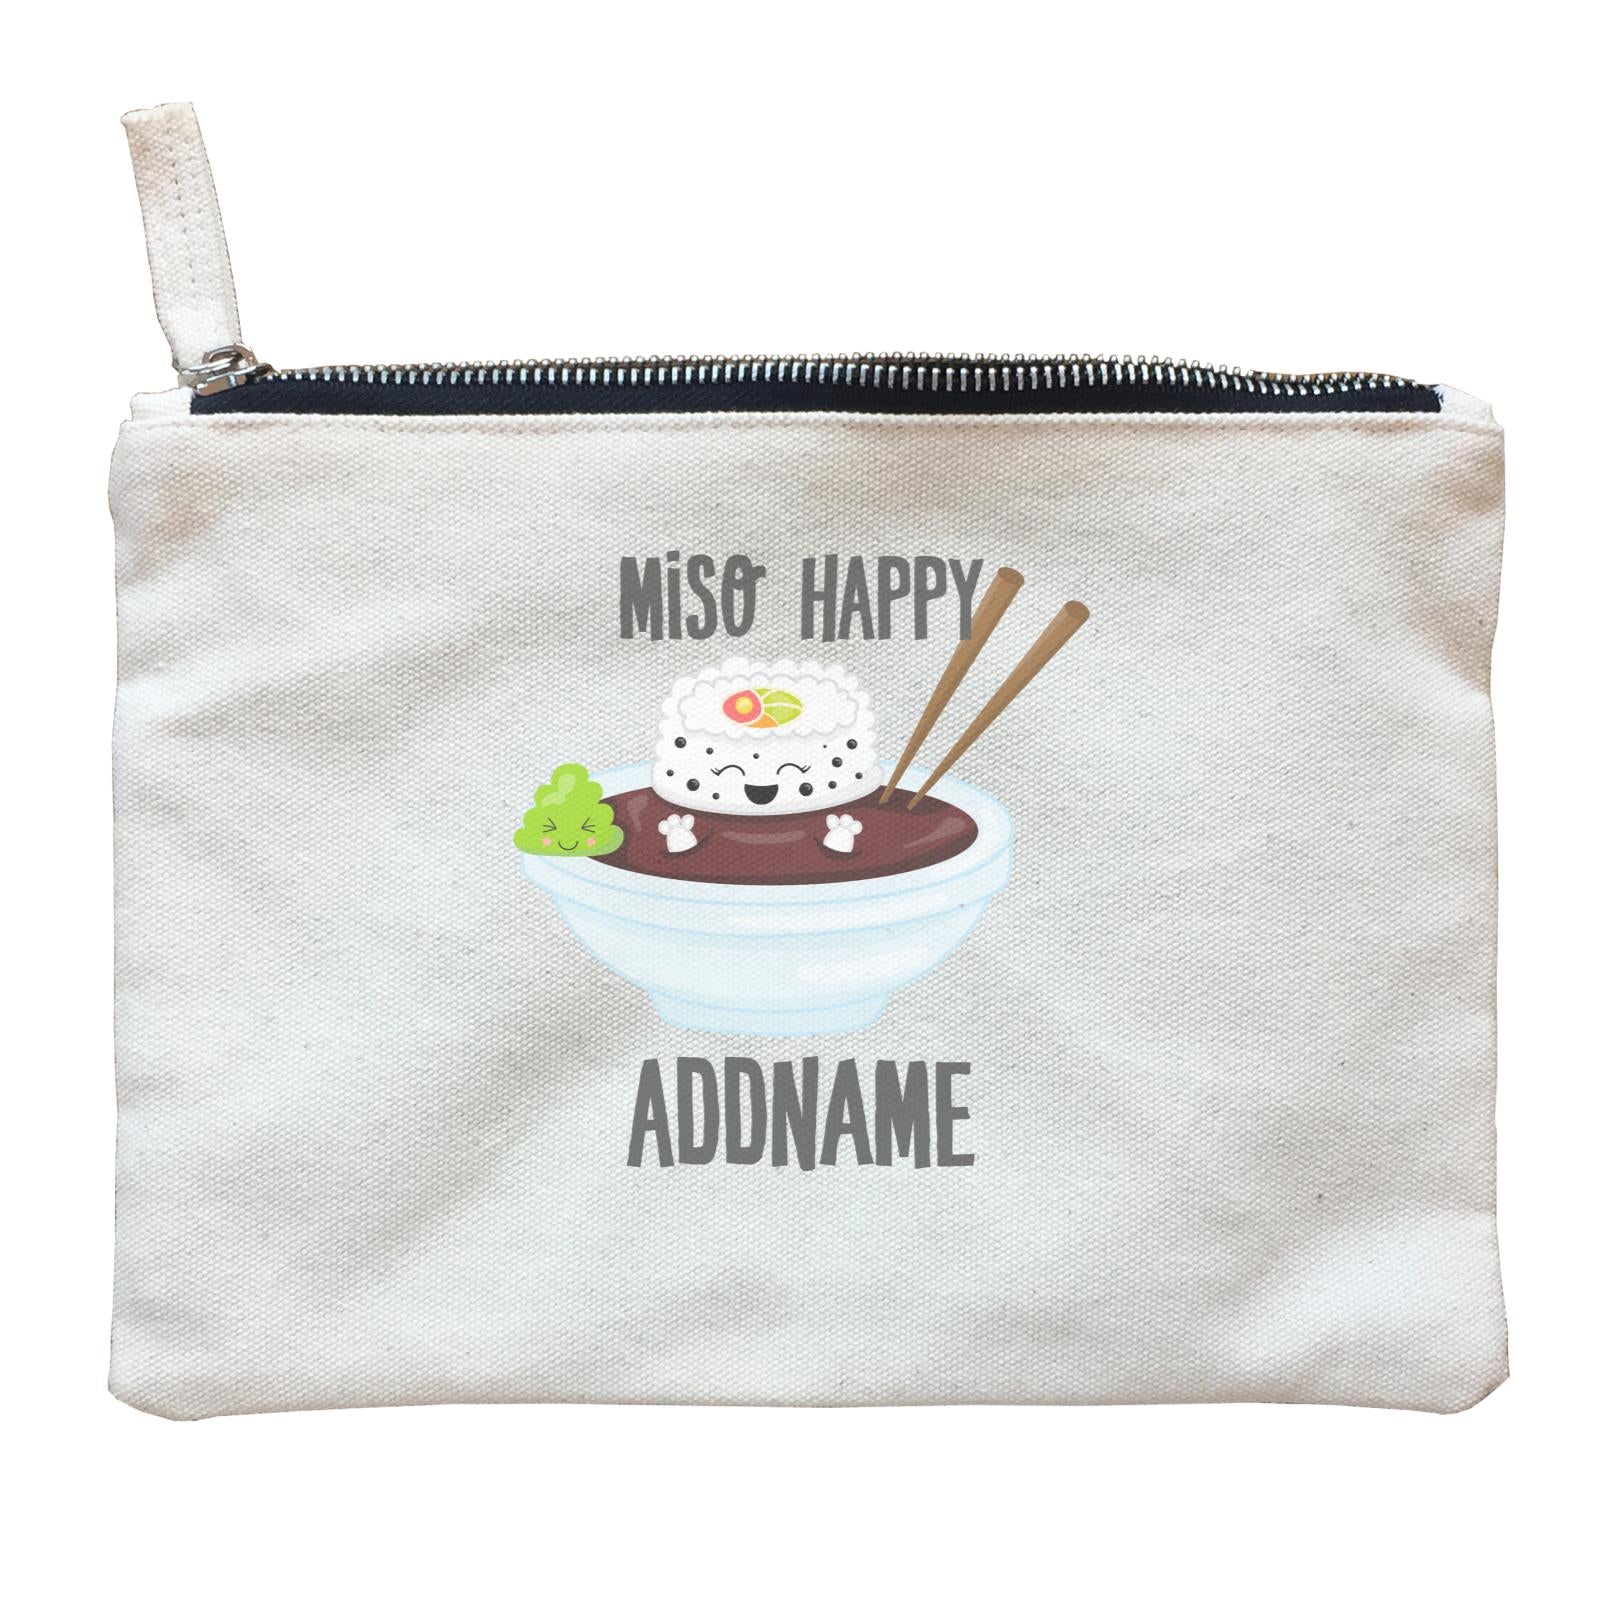 Miso Happy Sushi in Soy Sauce Addname Zipper Pouch